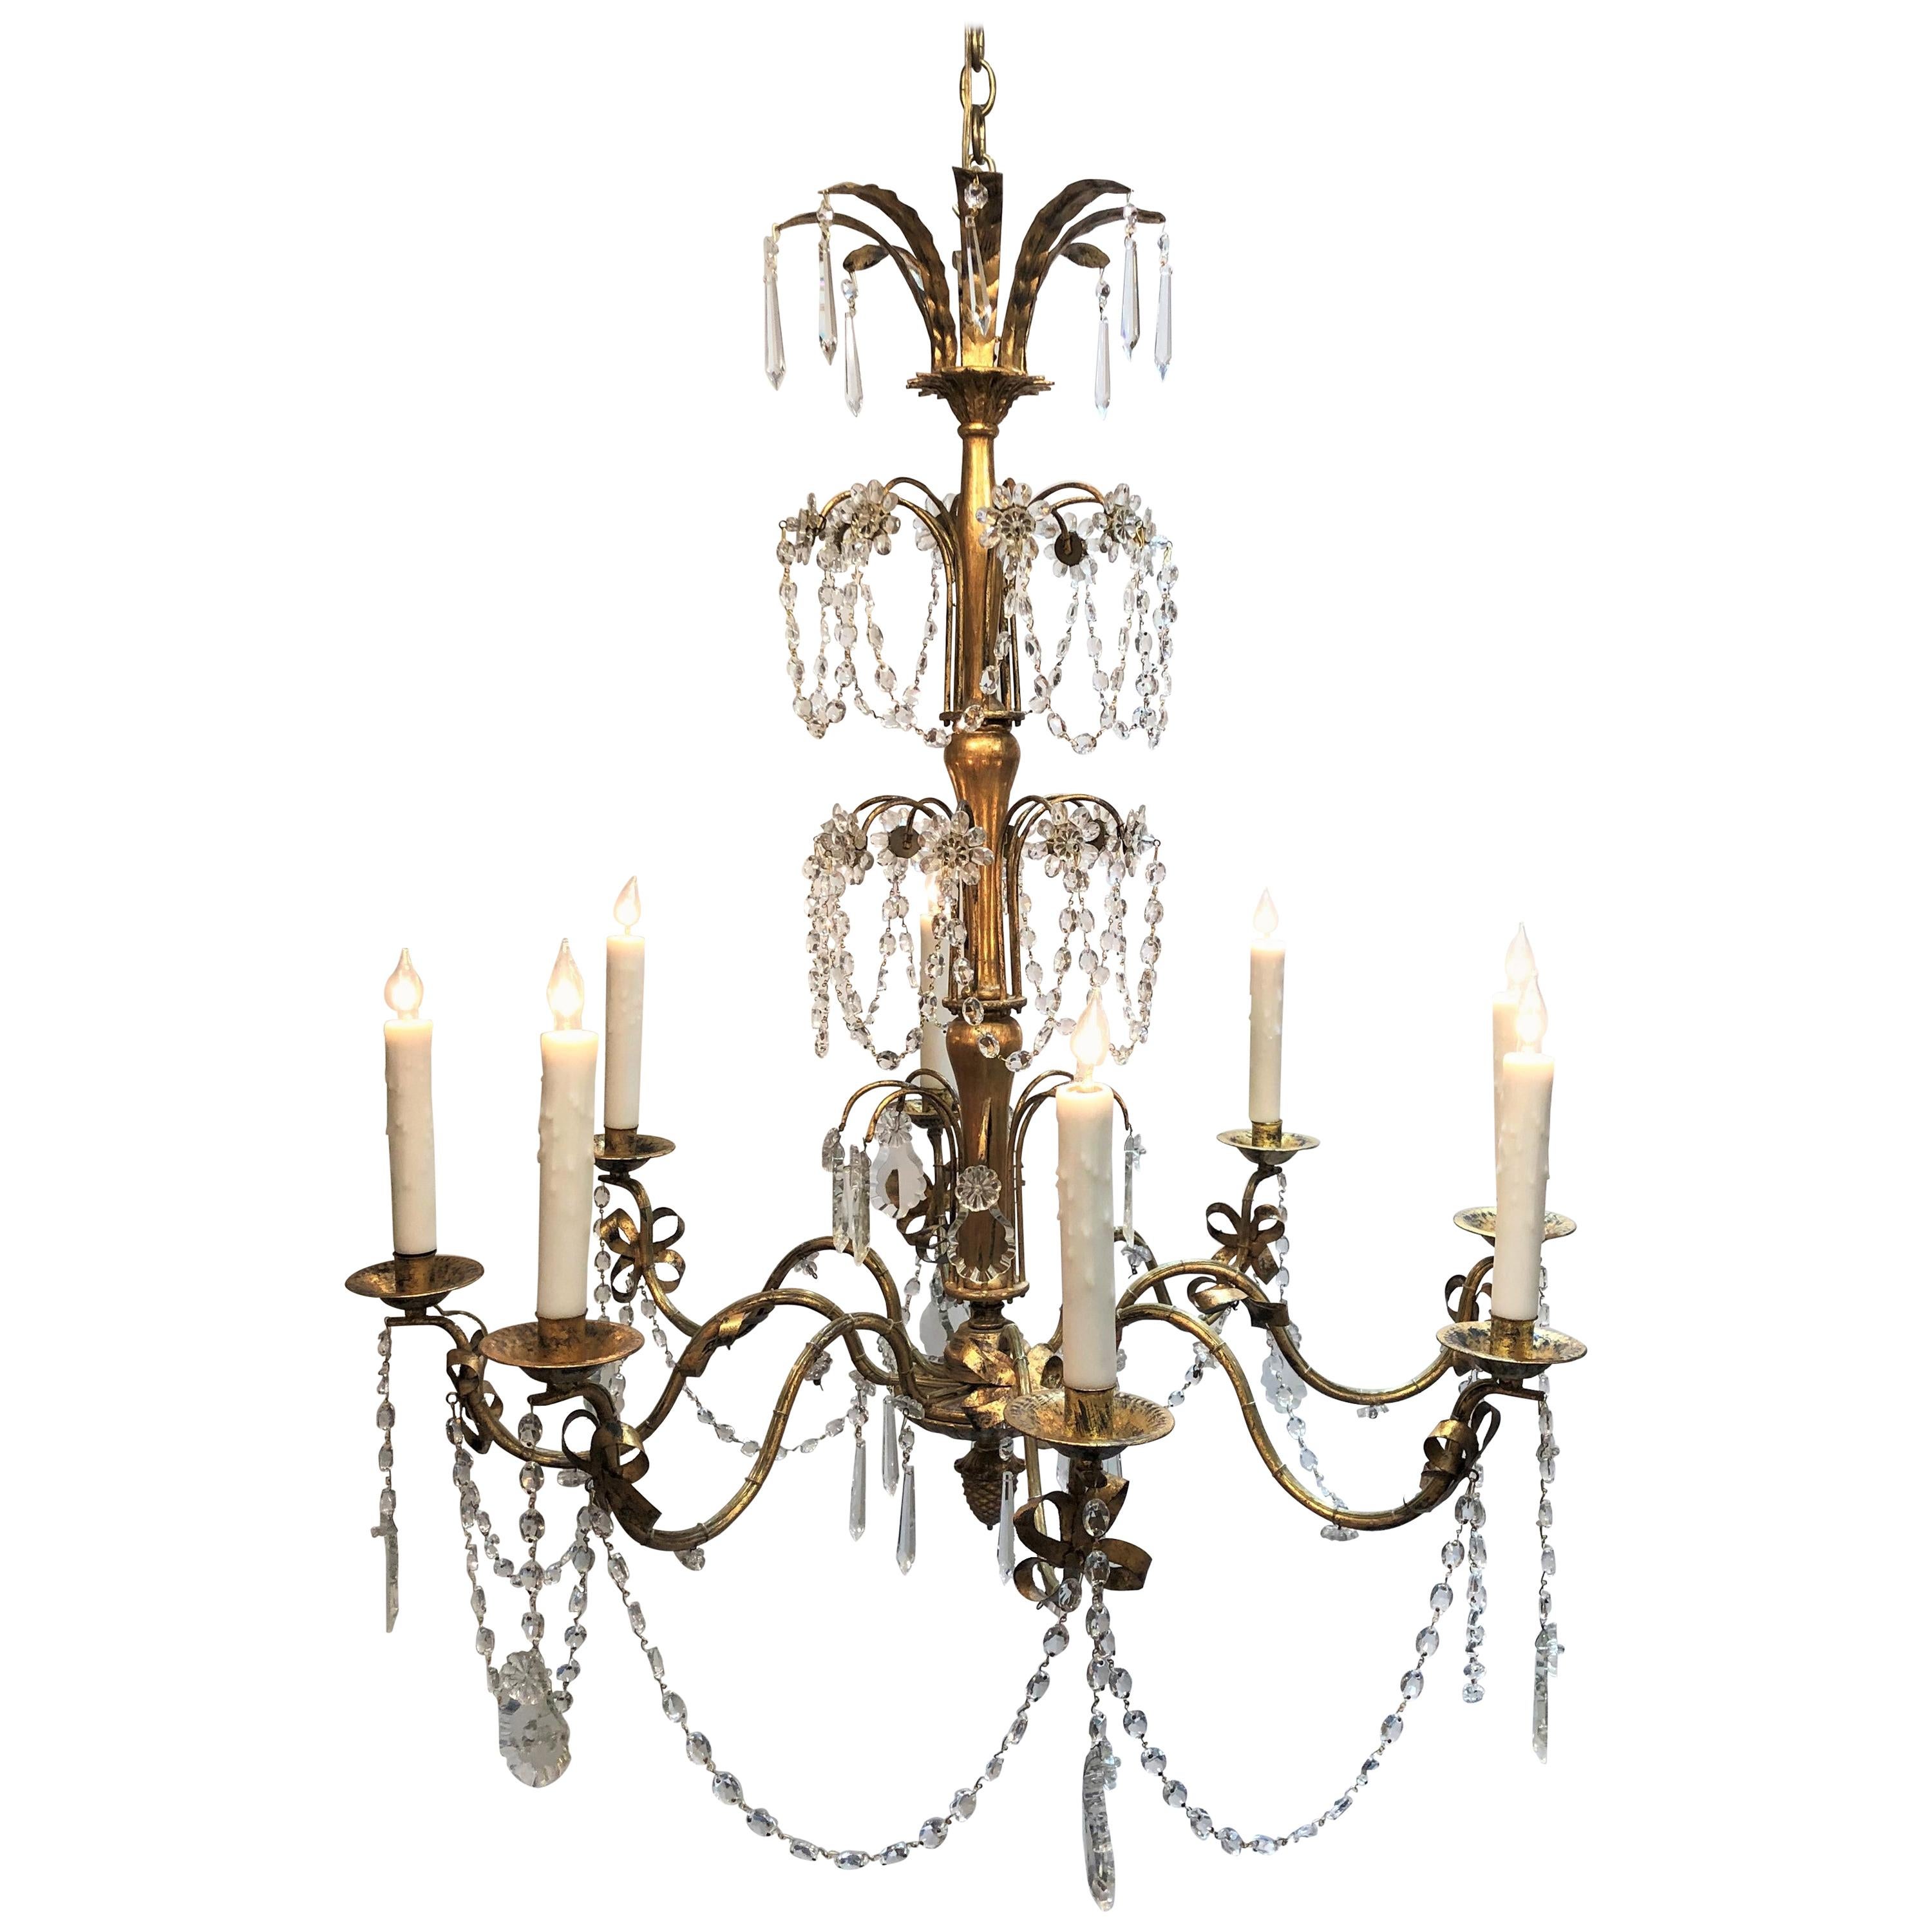 20th Century French Grand Tole and Crystal Chandelier